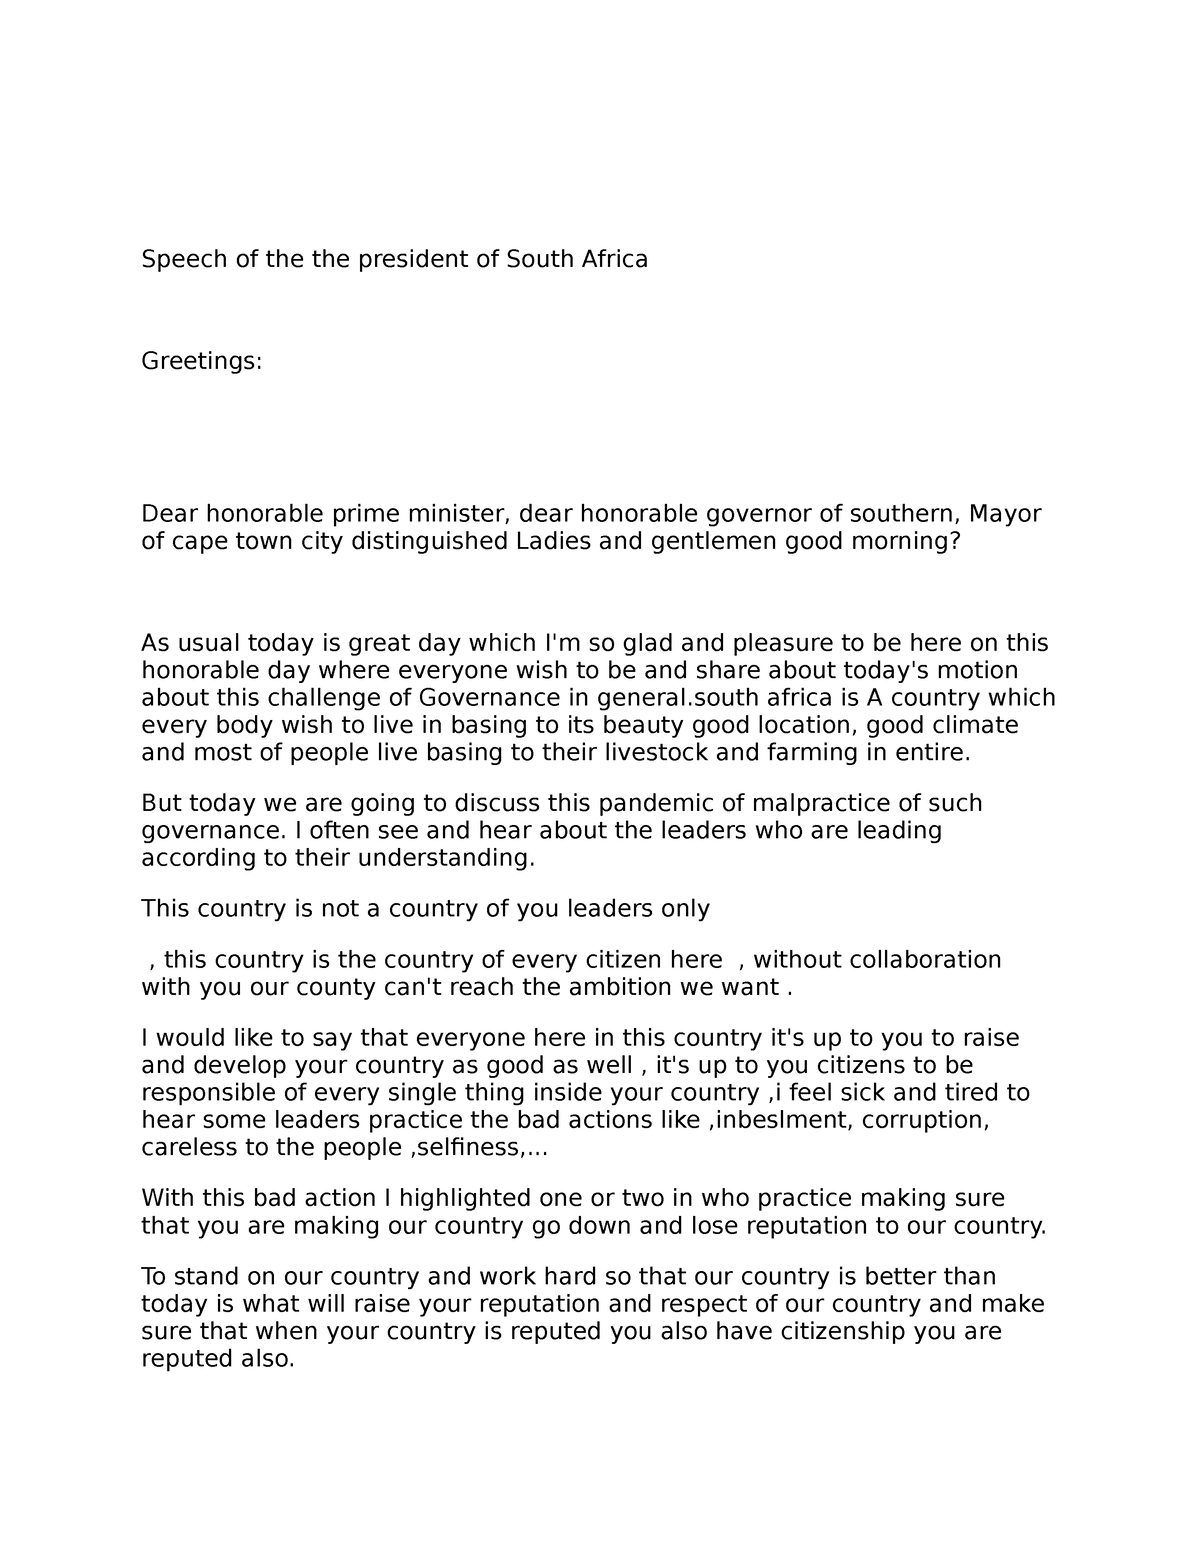 essay if i was the president of south africa